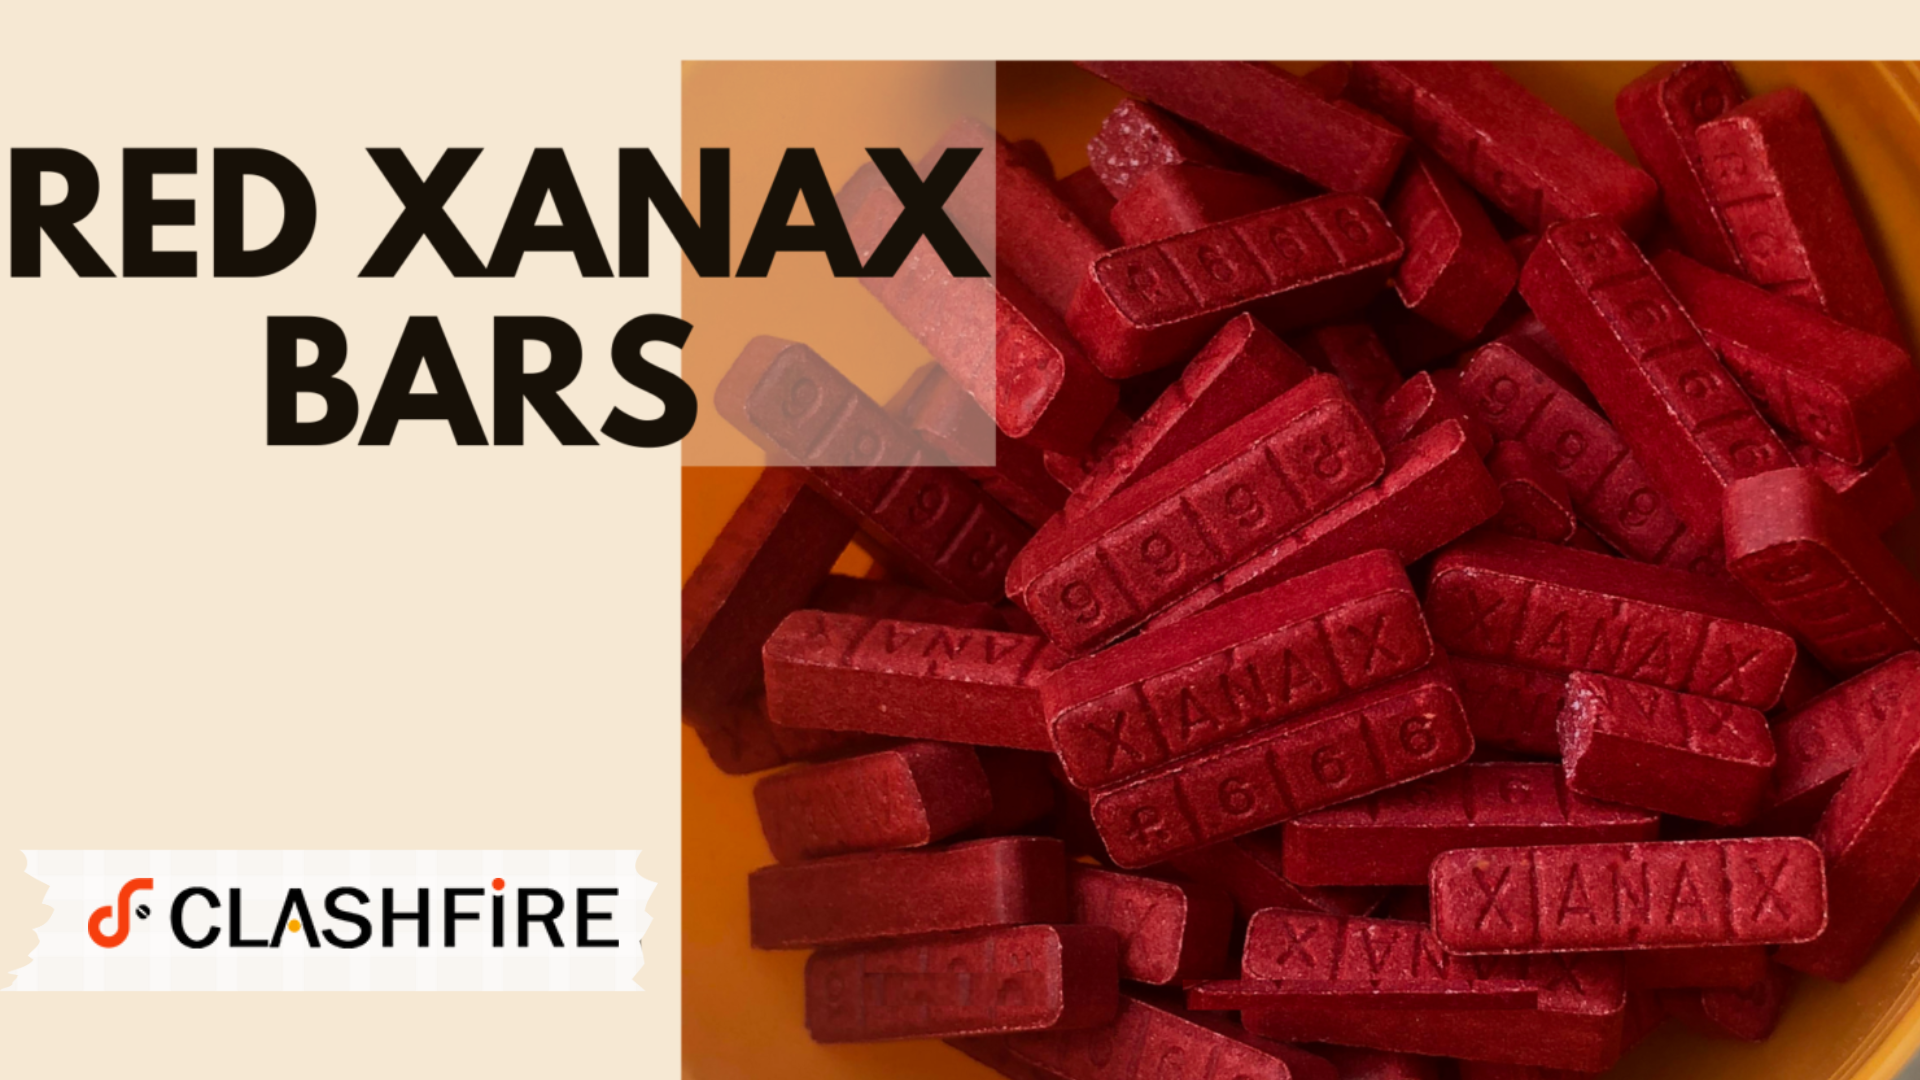 Know About Red Xanax Bars and There Uses 2